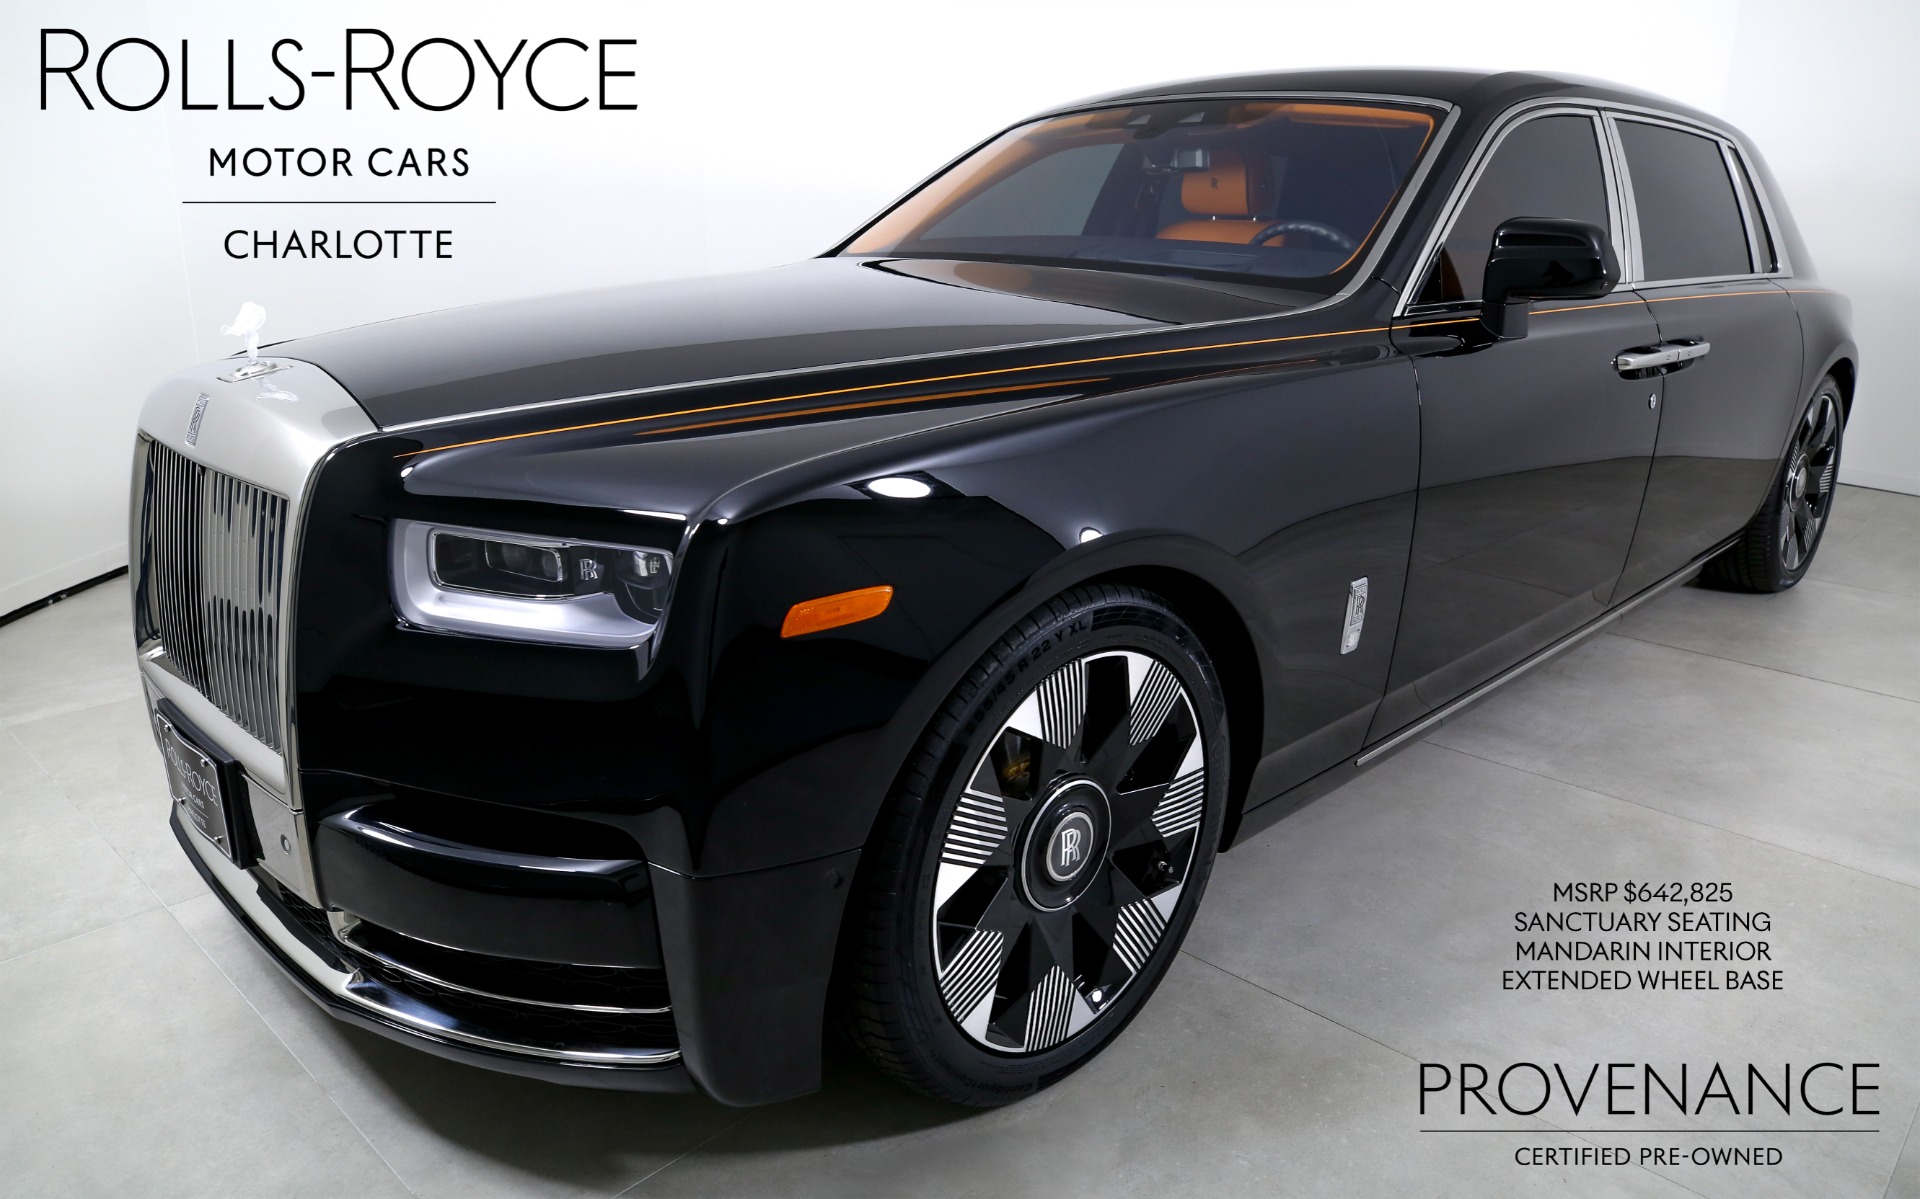 How Much is a Rolls-Royce?